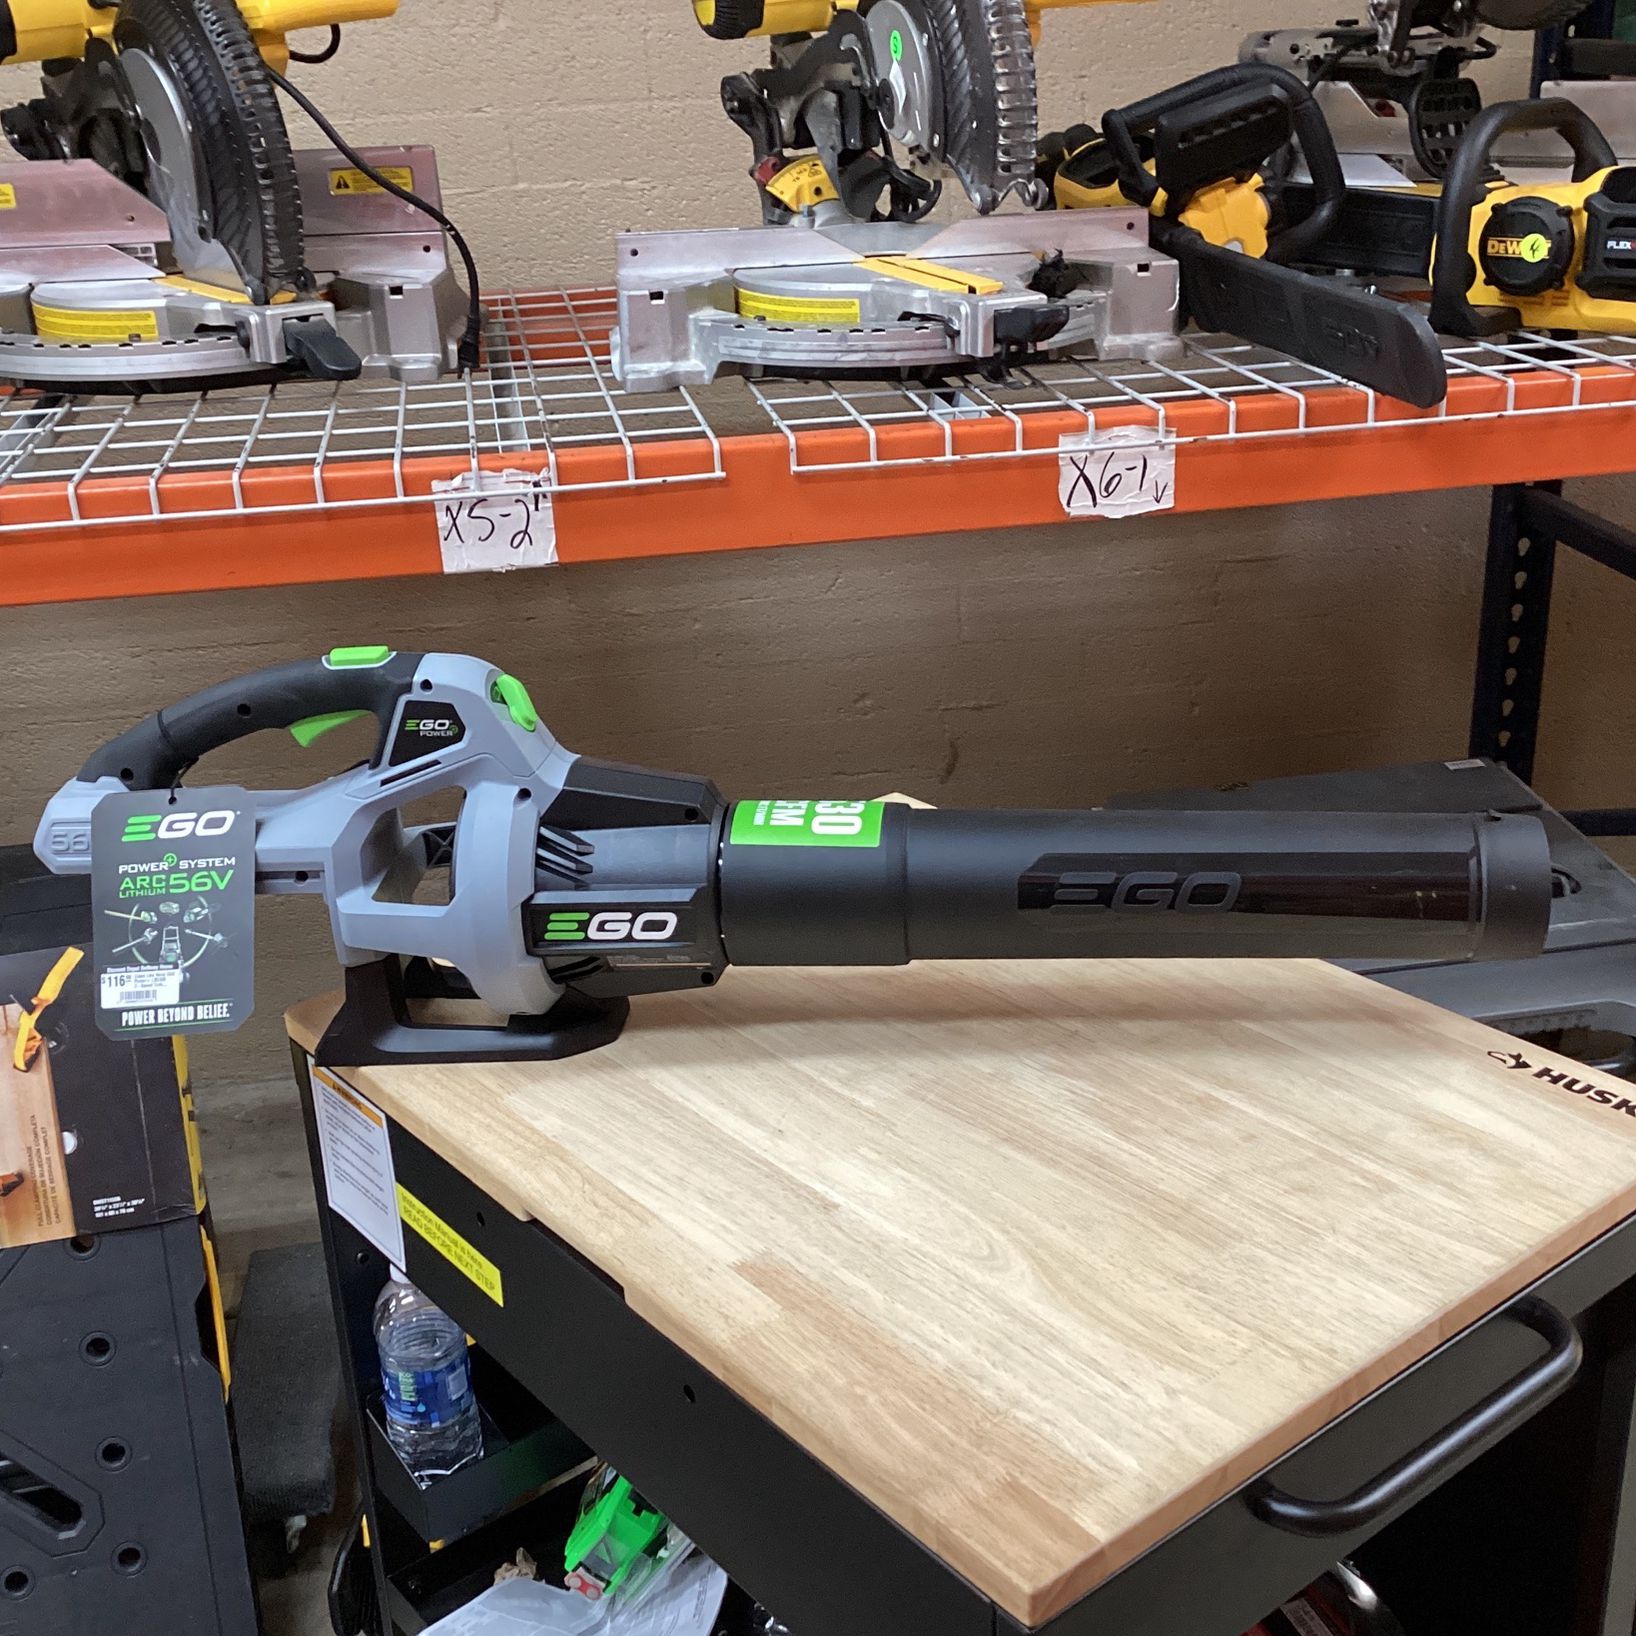 (Used Like New) EGO Power+ LB5300 3-Speed Turbo 56-Volt 530 CFM Cordless Leaf Blower (TOOL ONLY)